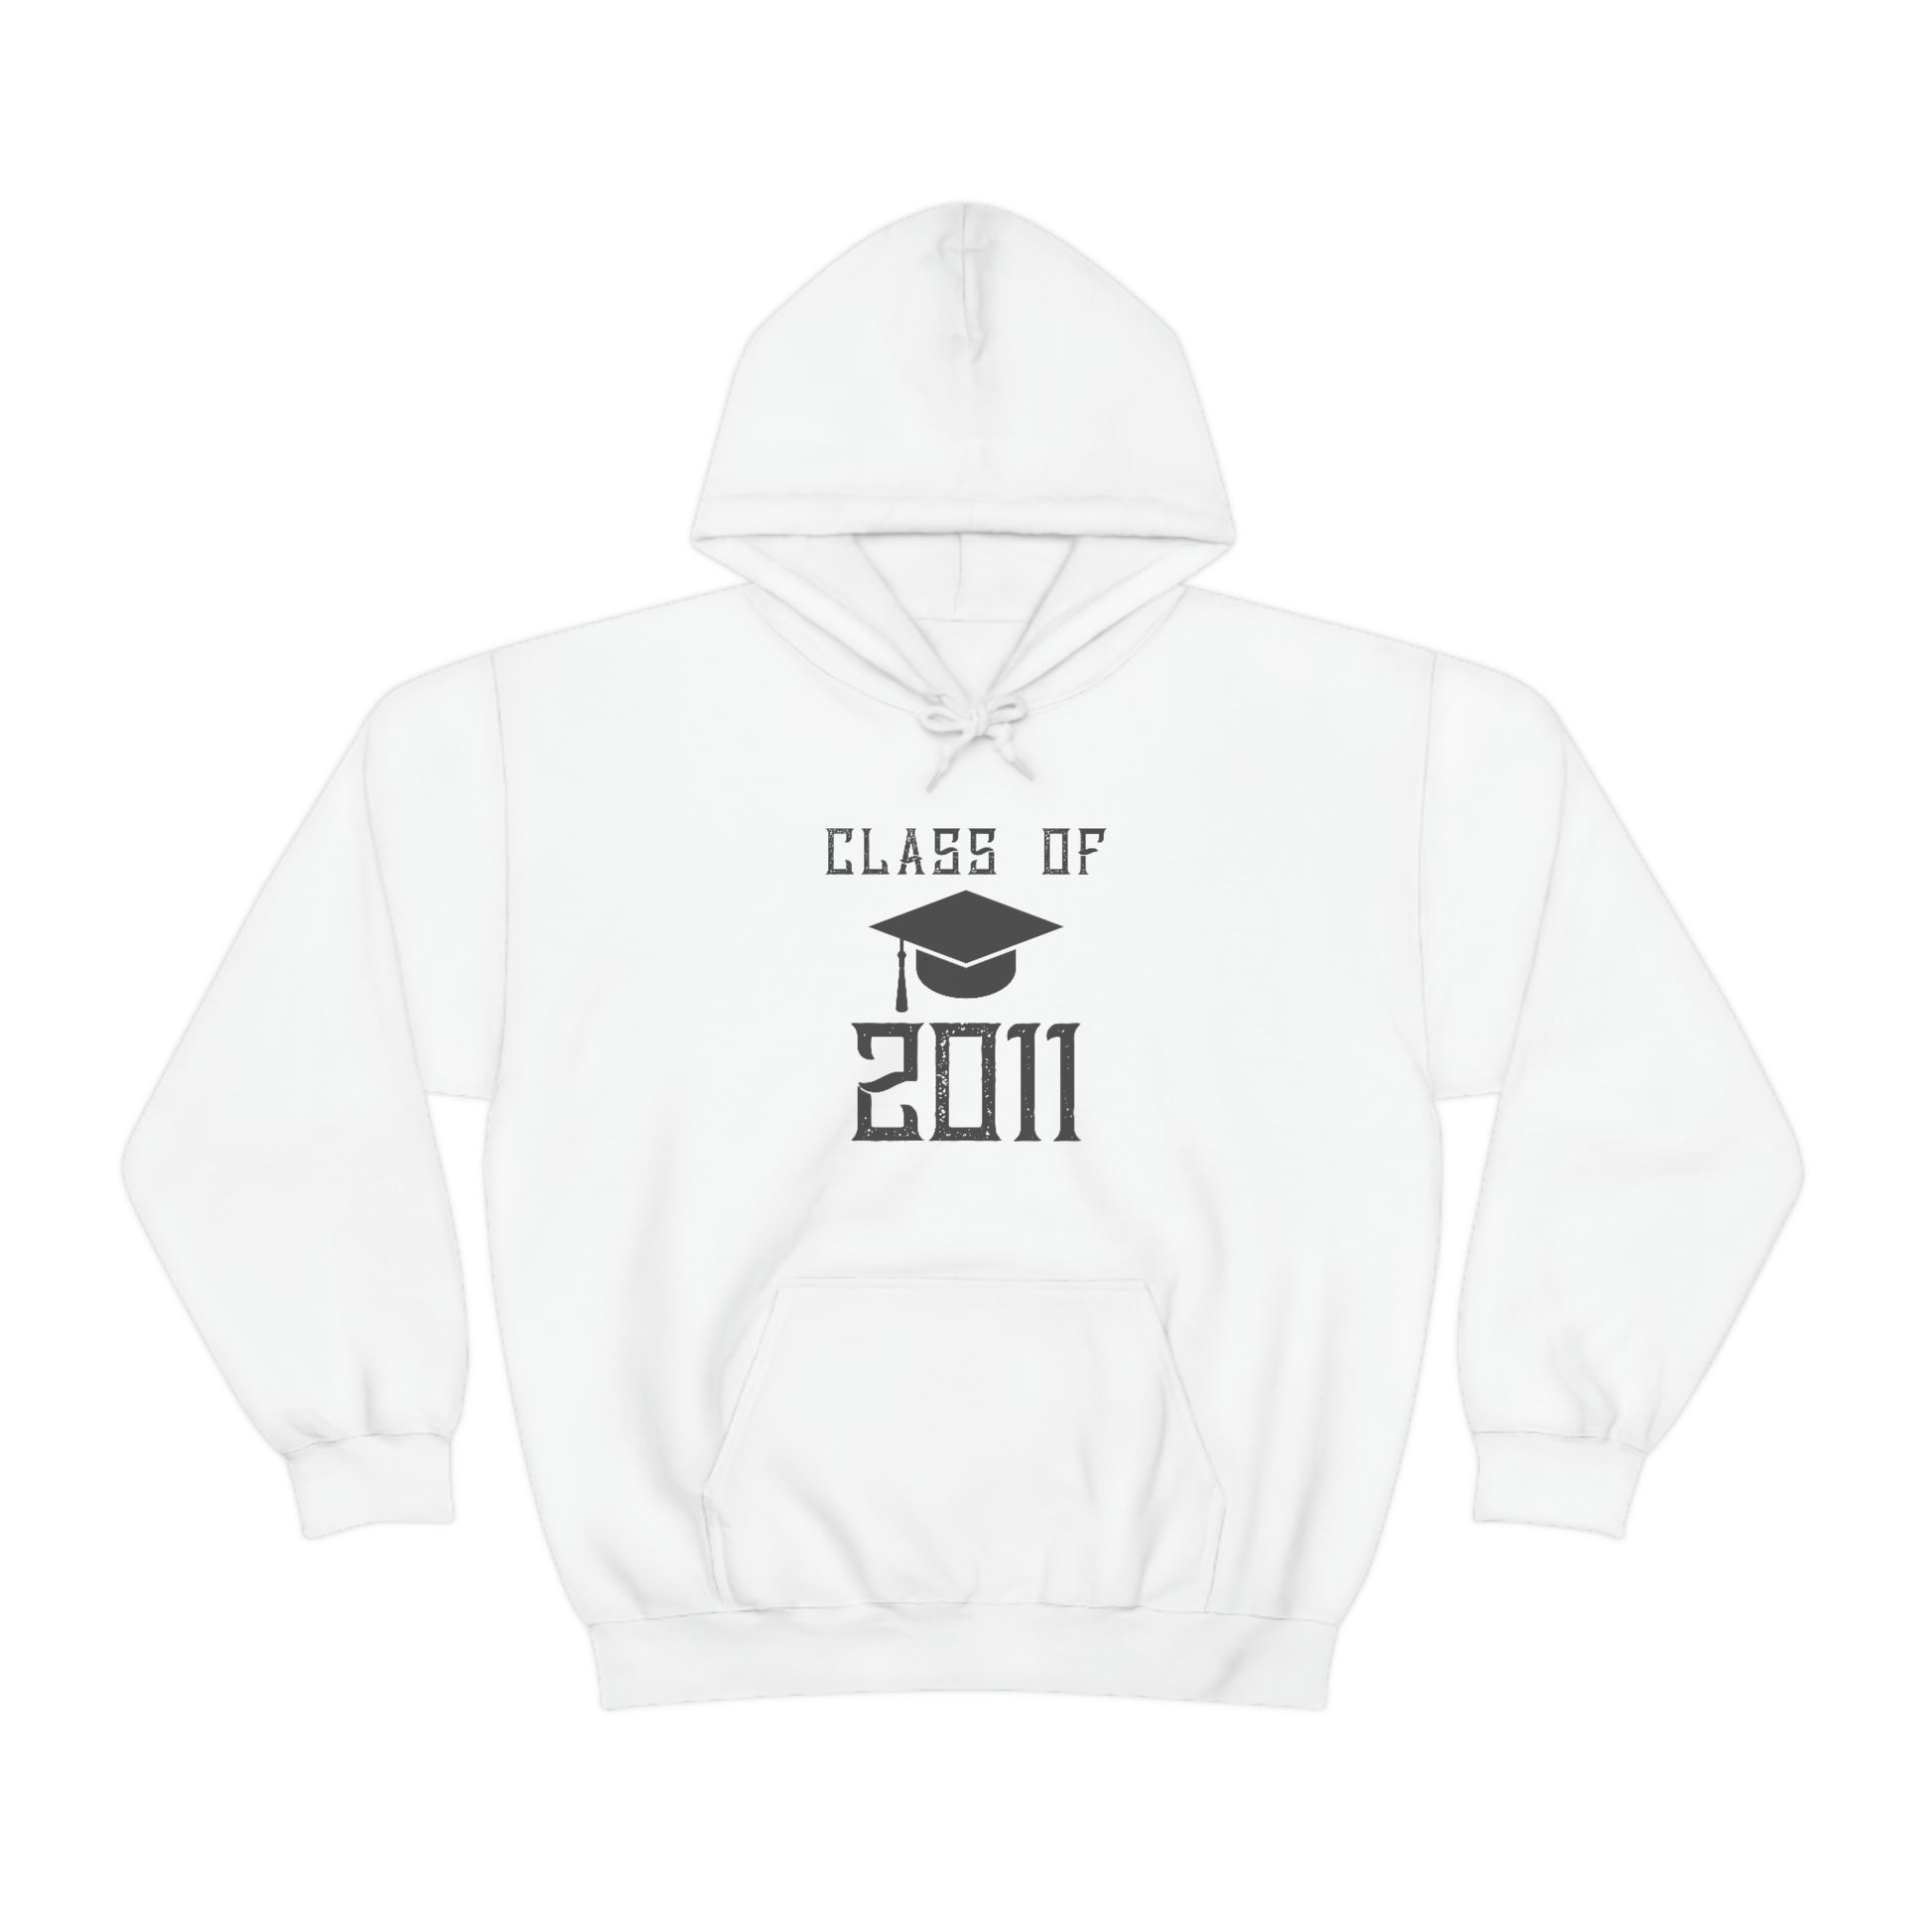 "Class Of 2011" Hoodie - Weave Got Gifts - Unique Gifts You Won’t Find Anywhere Else!